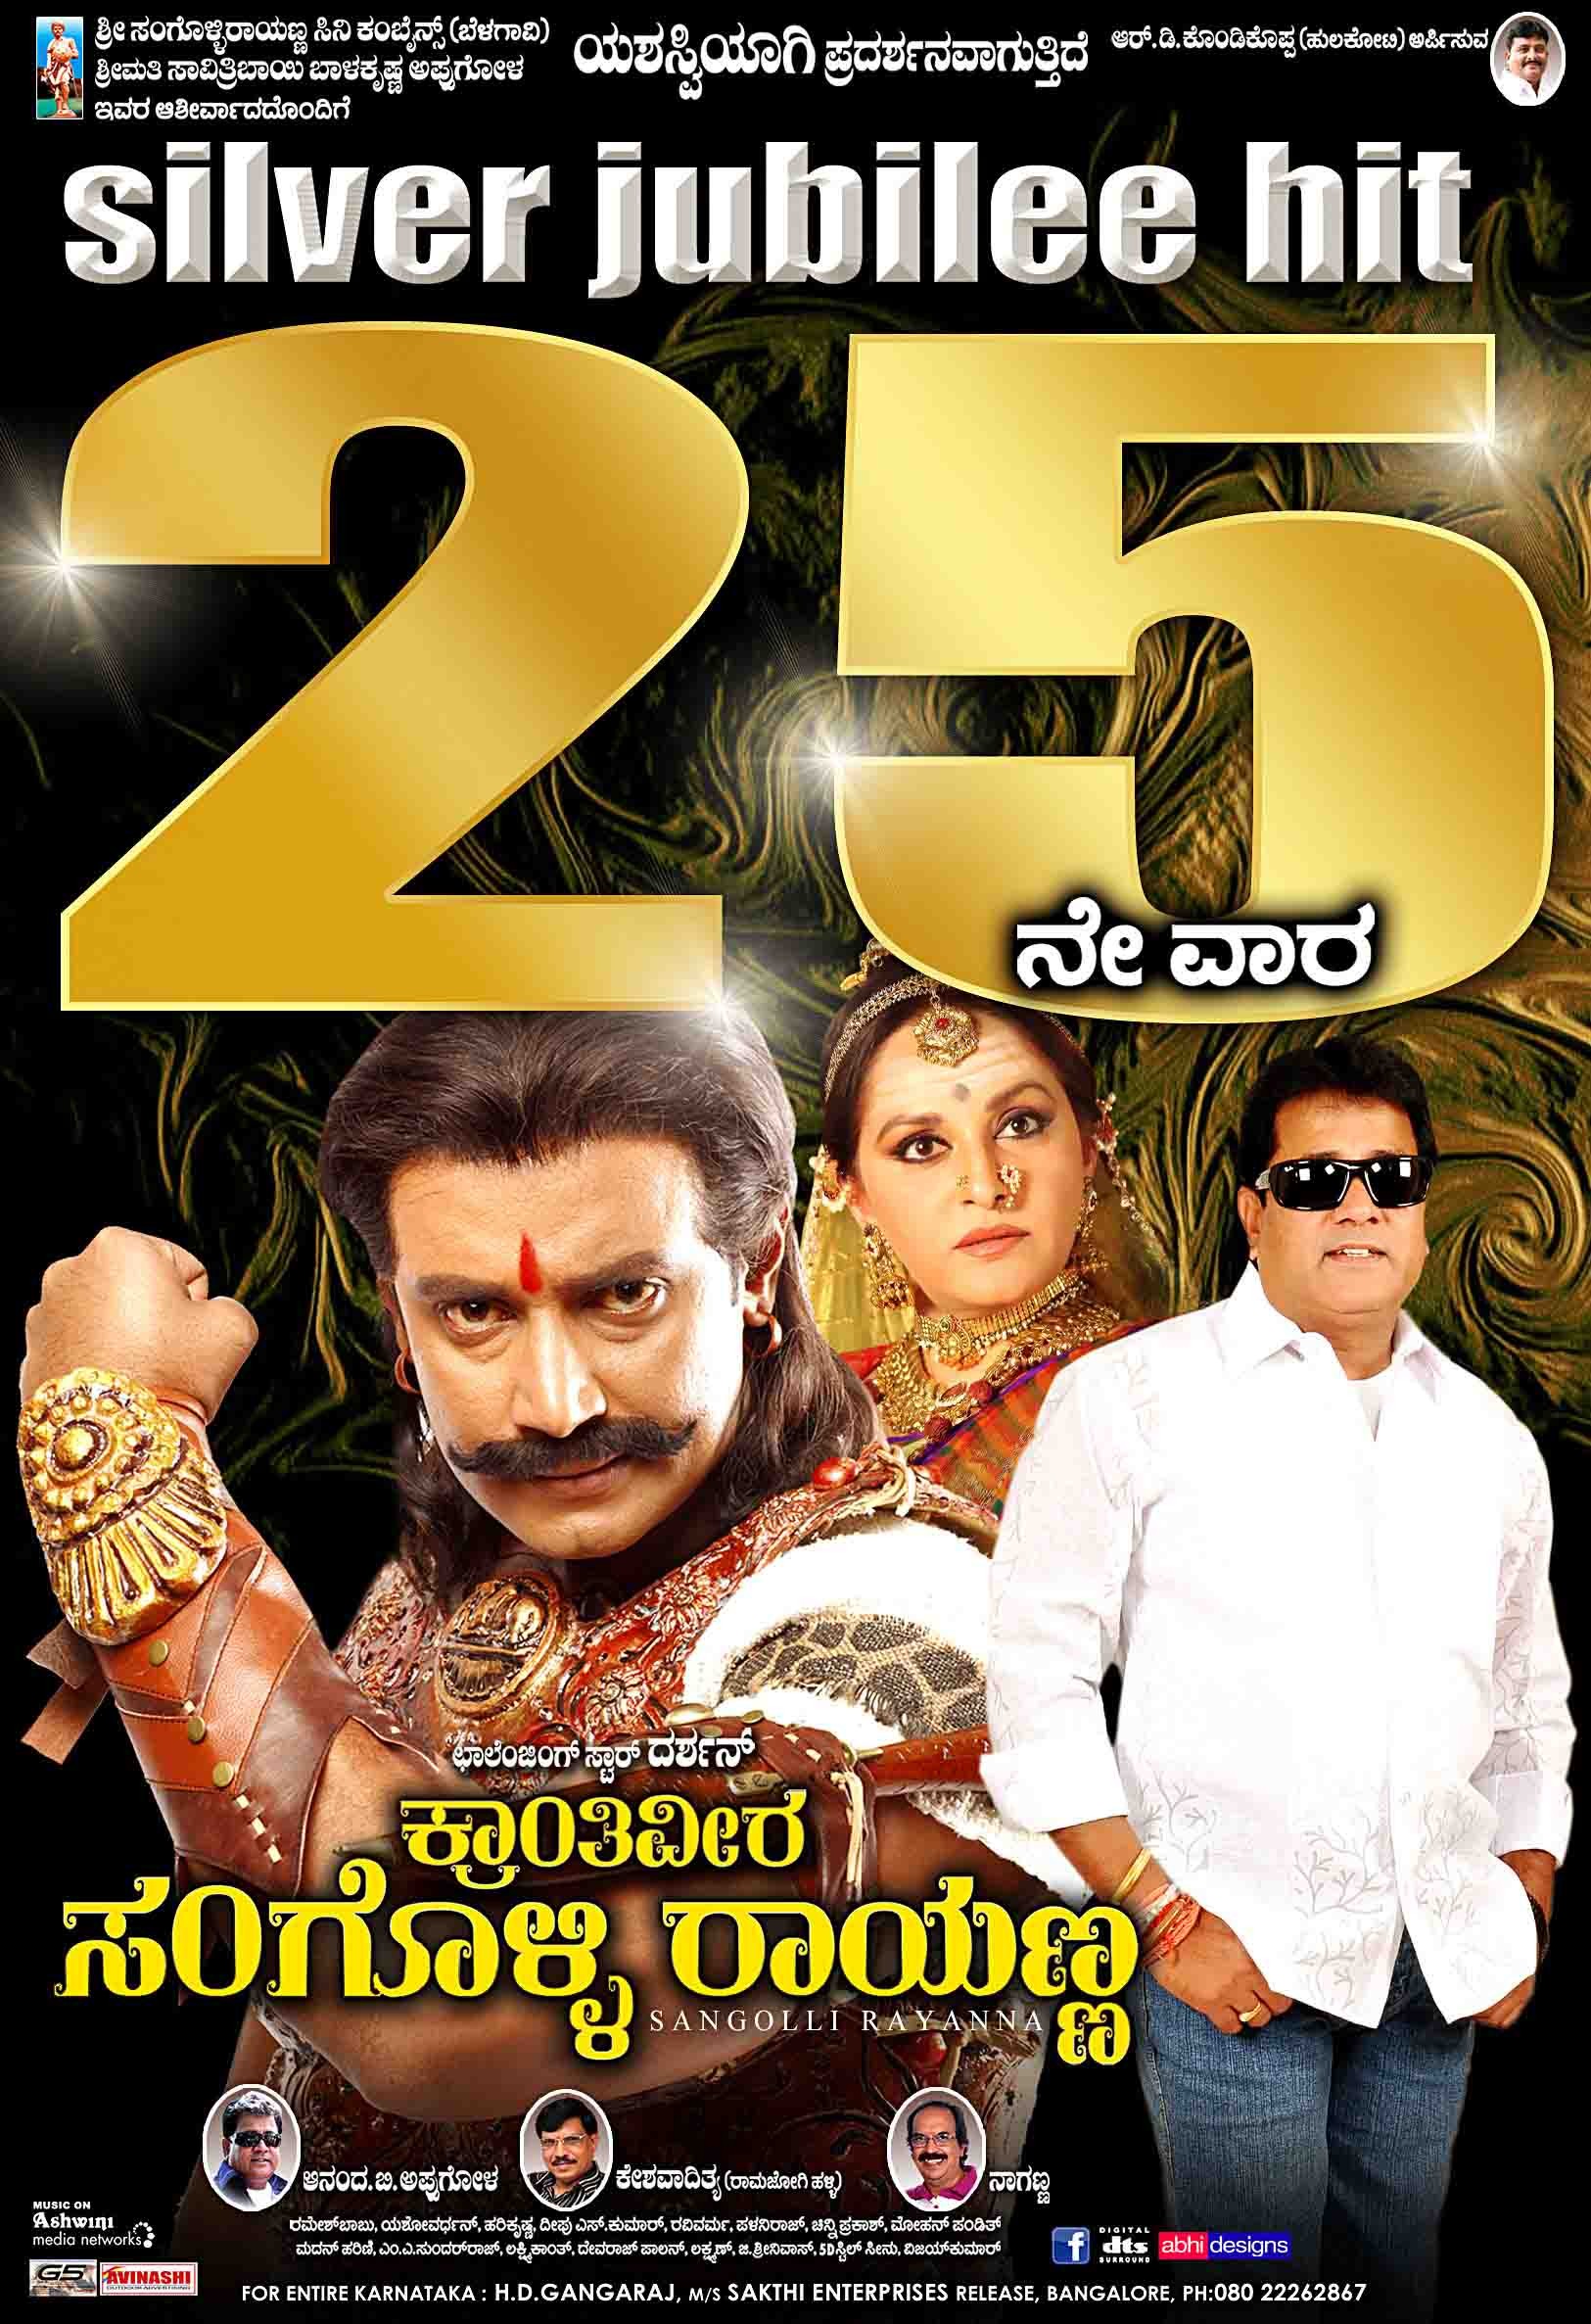 Mega Sized Movie Poster Image for Sangolli Rayanna (#74 of 79)